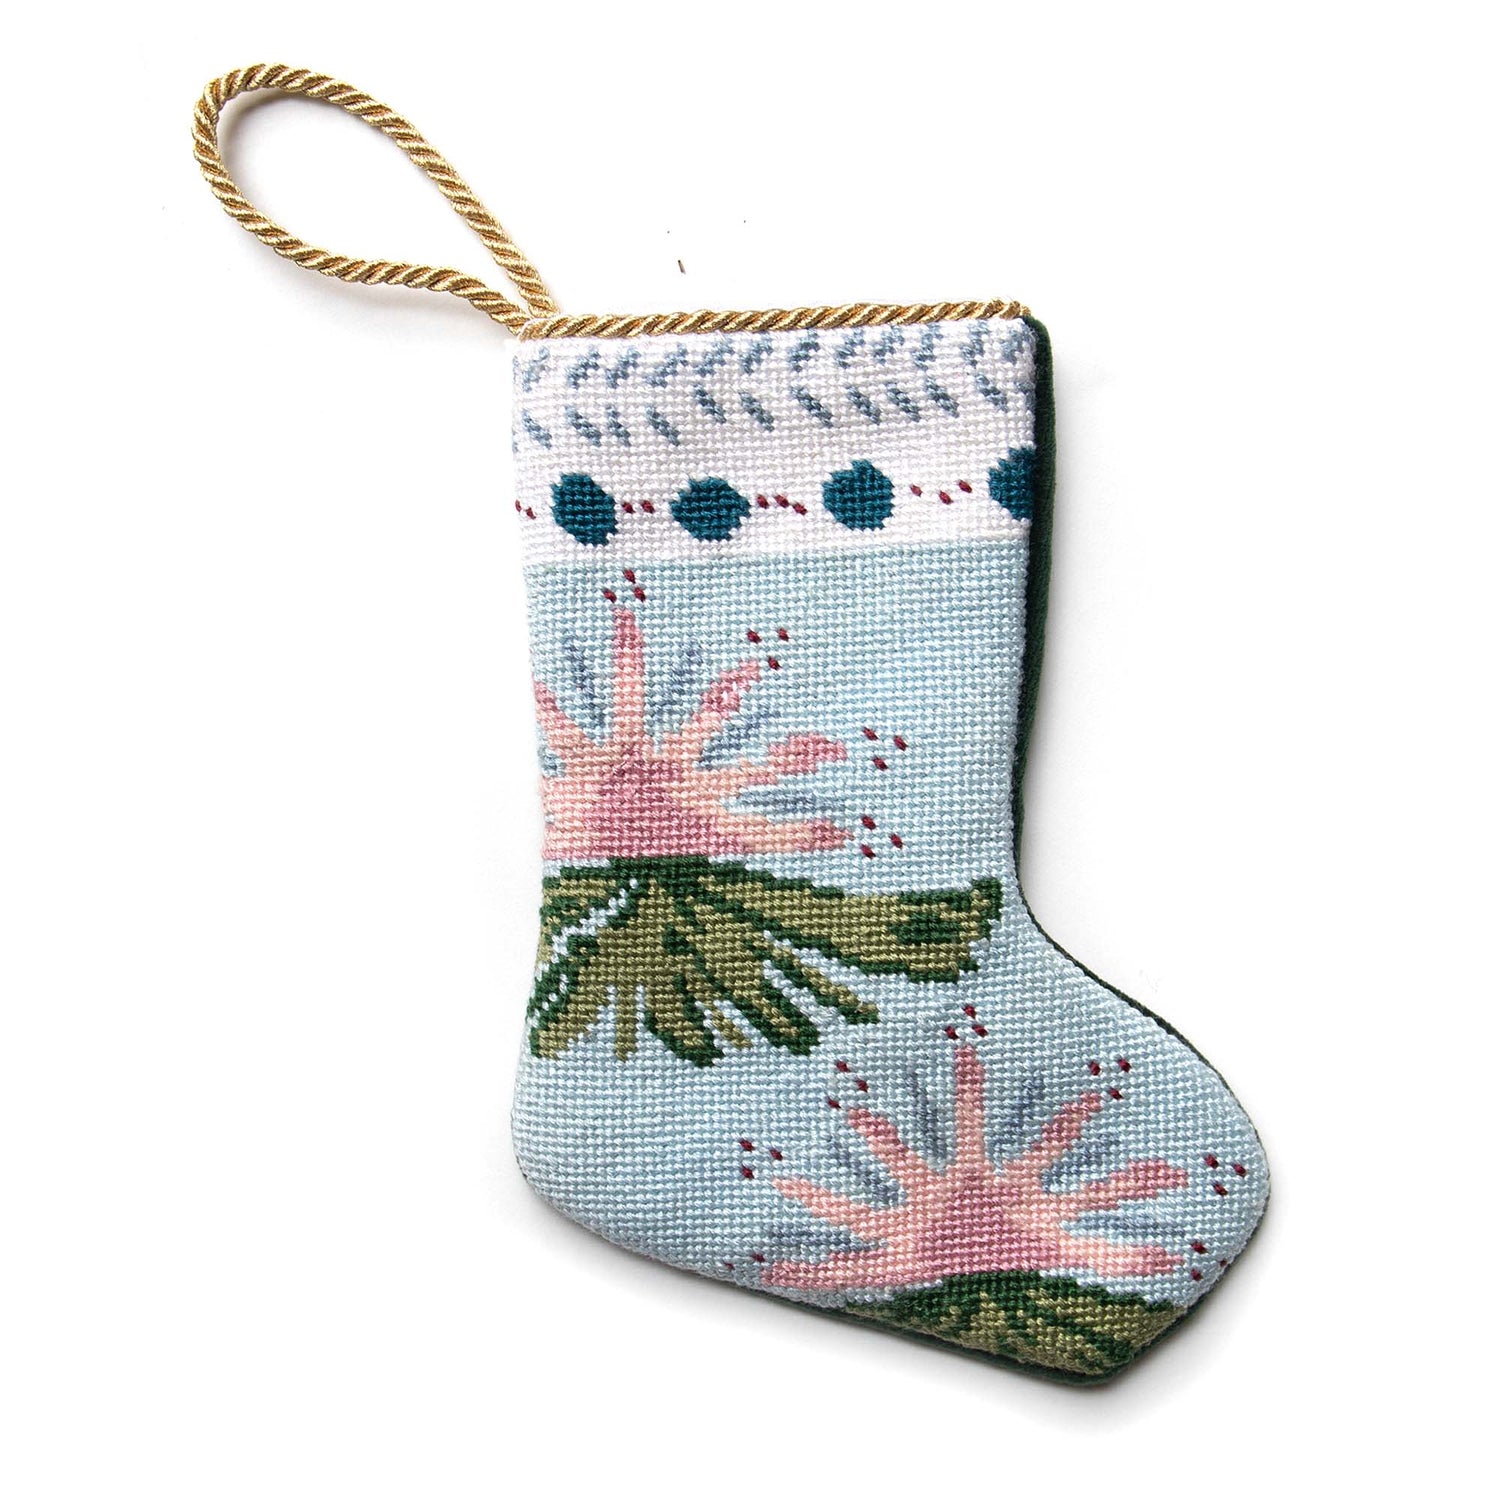 Hand-painted Floral Printed Bauble Stocking